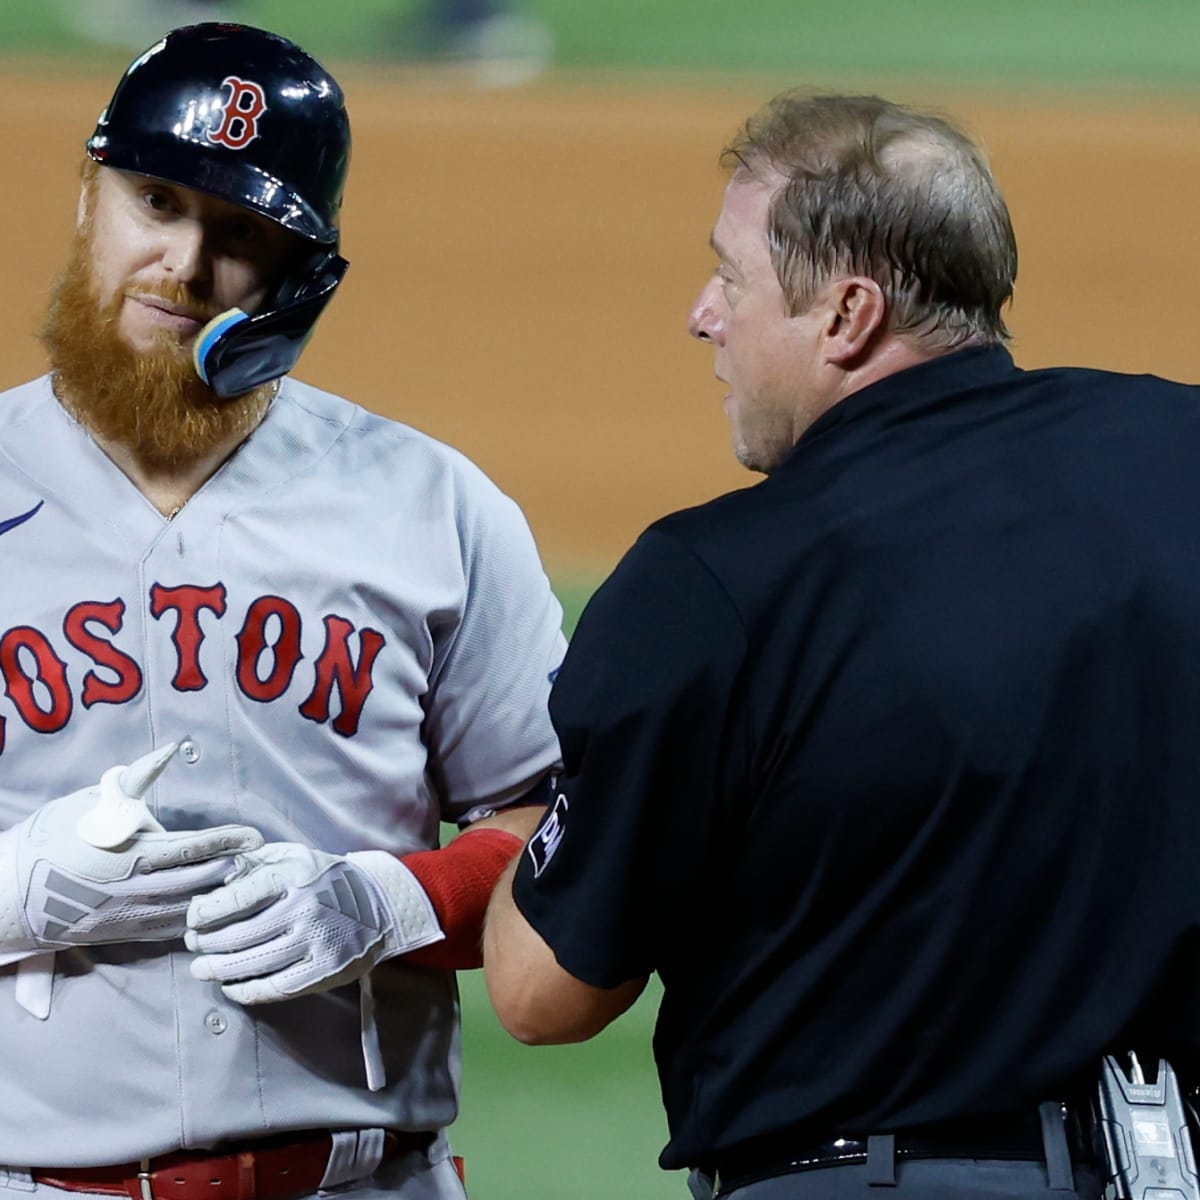 Announcers for Both Teams Couldnt Believe Strike 3 Call on Red Sox DH Justin Turner